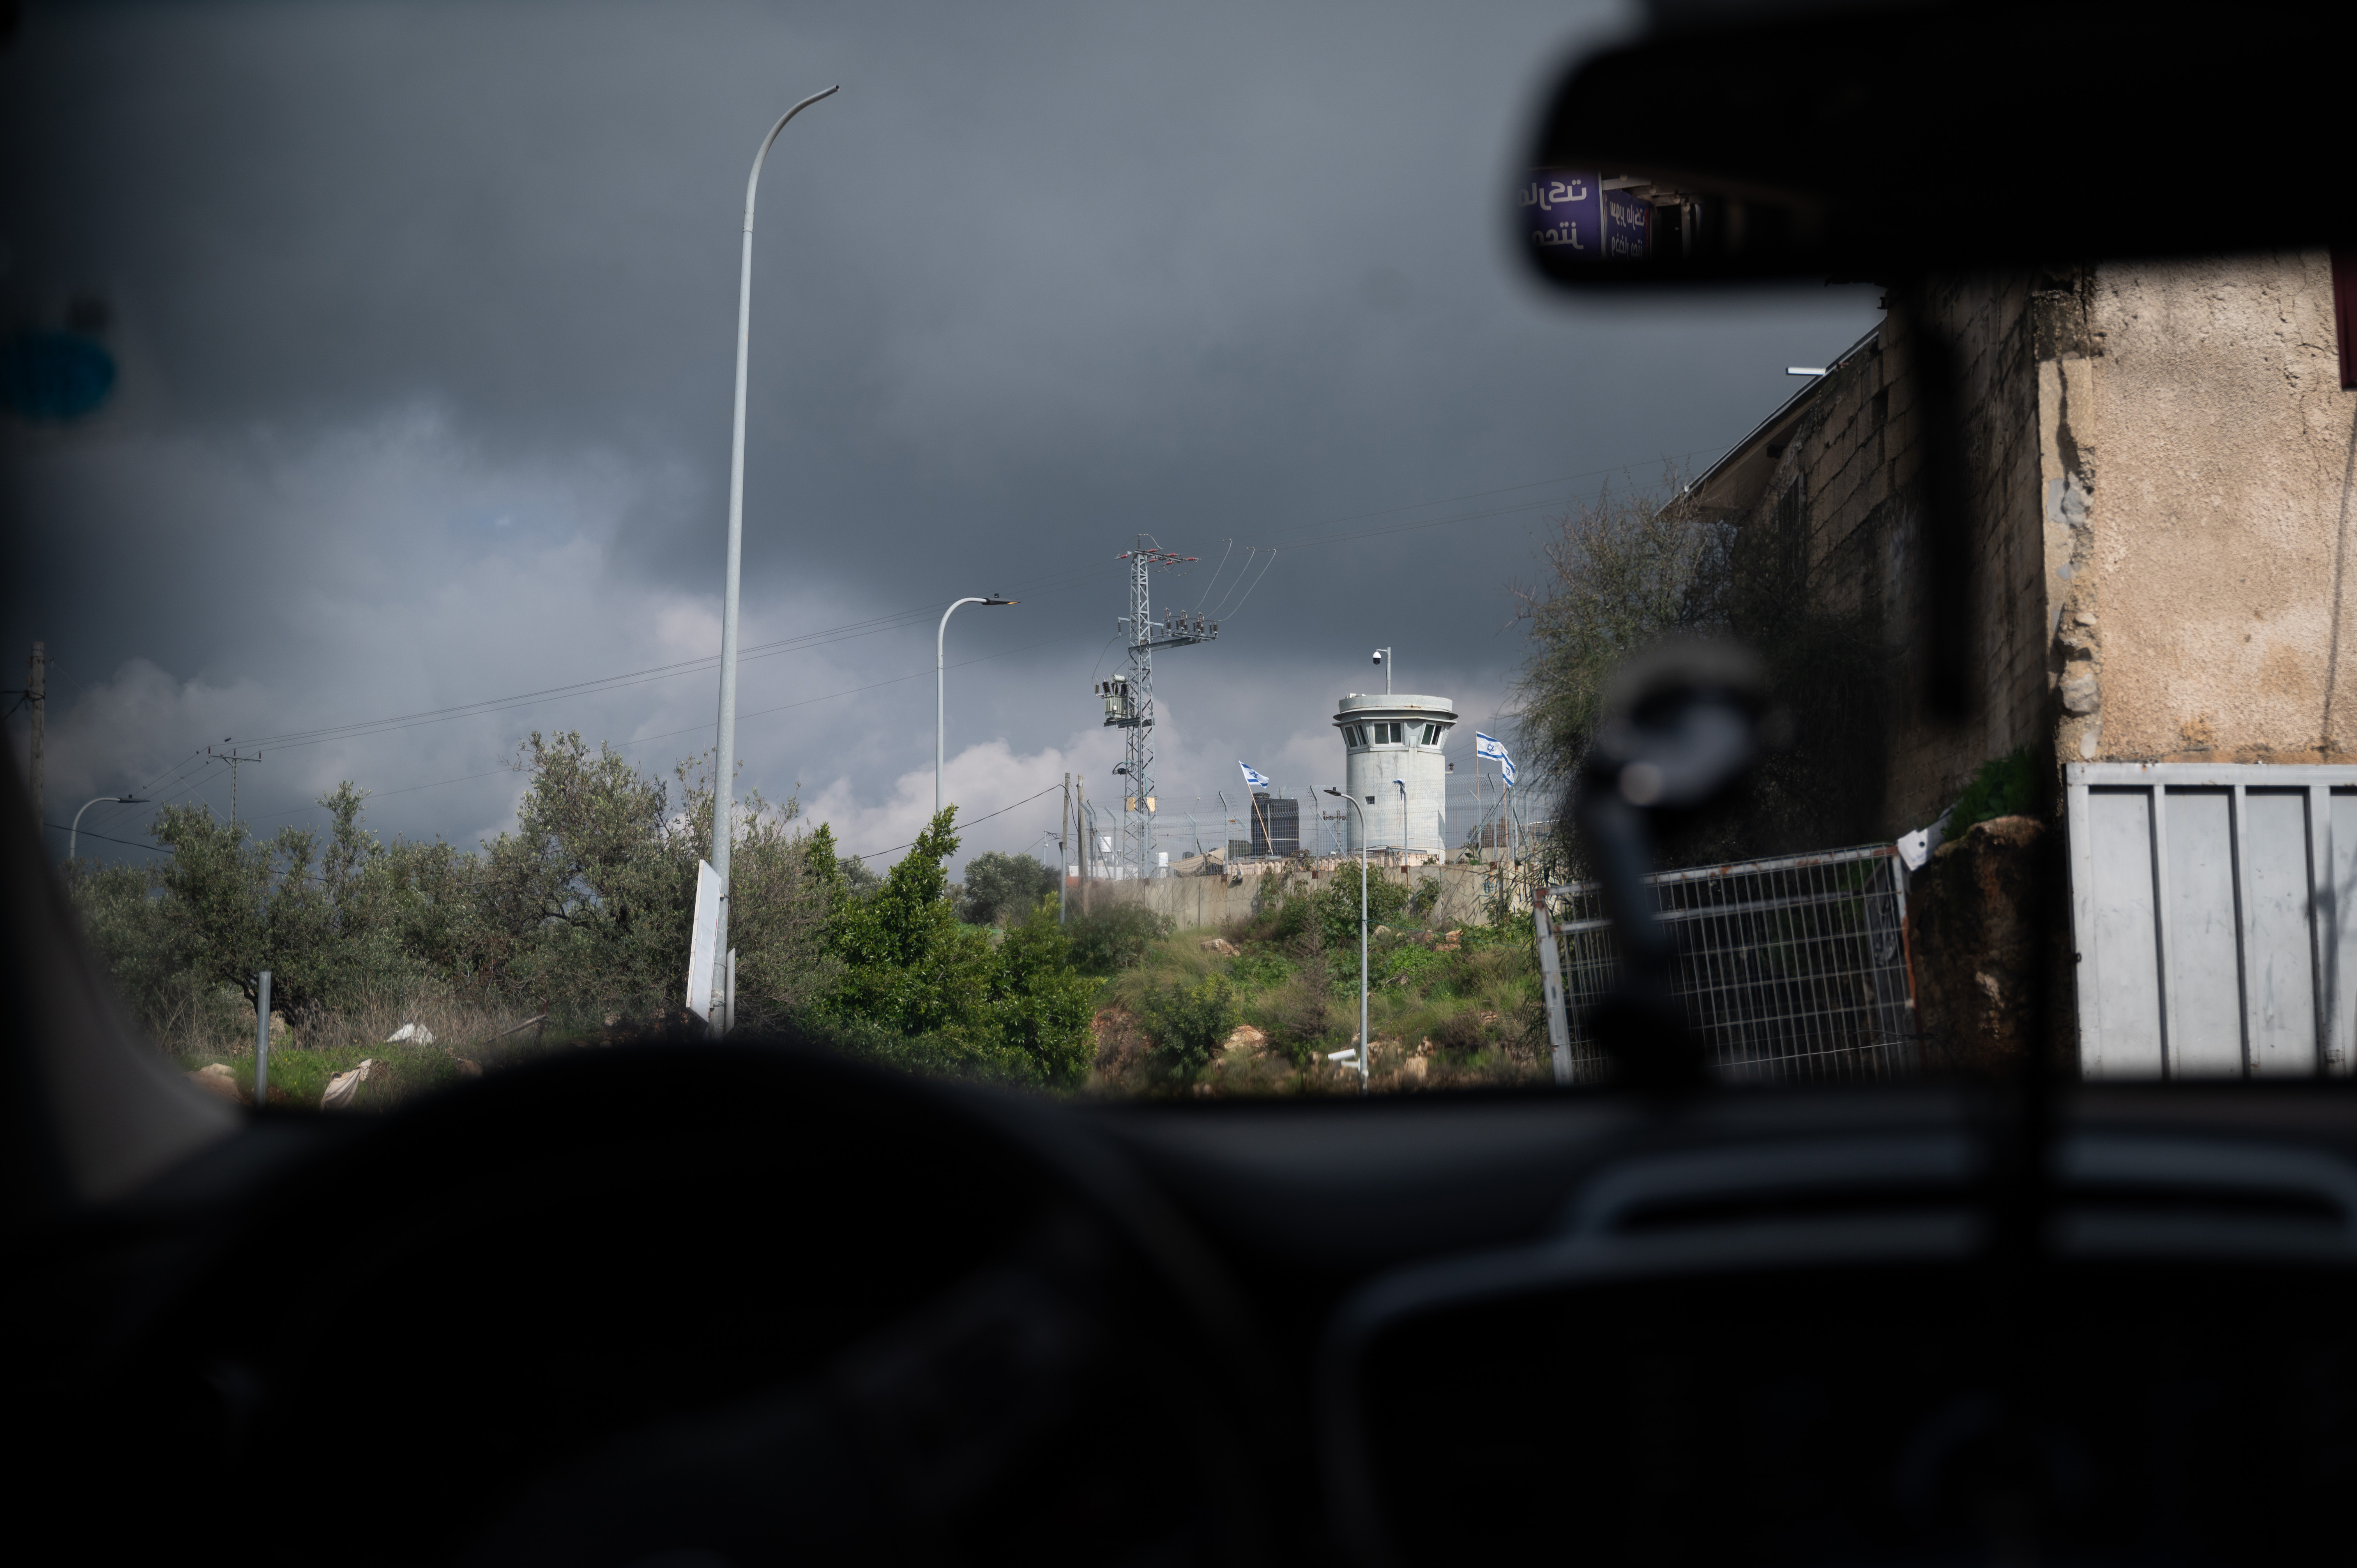 View of a watchtower from inside a car.